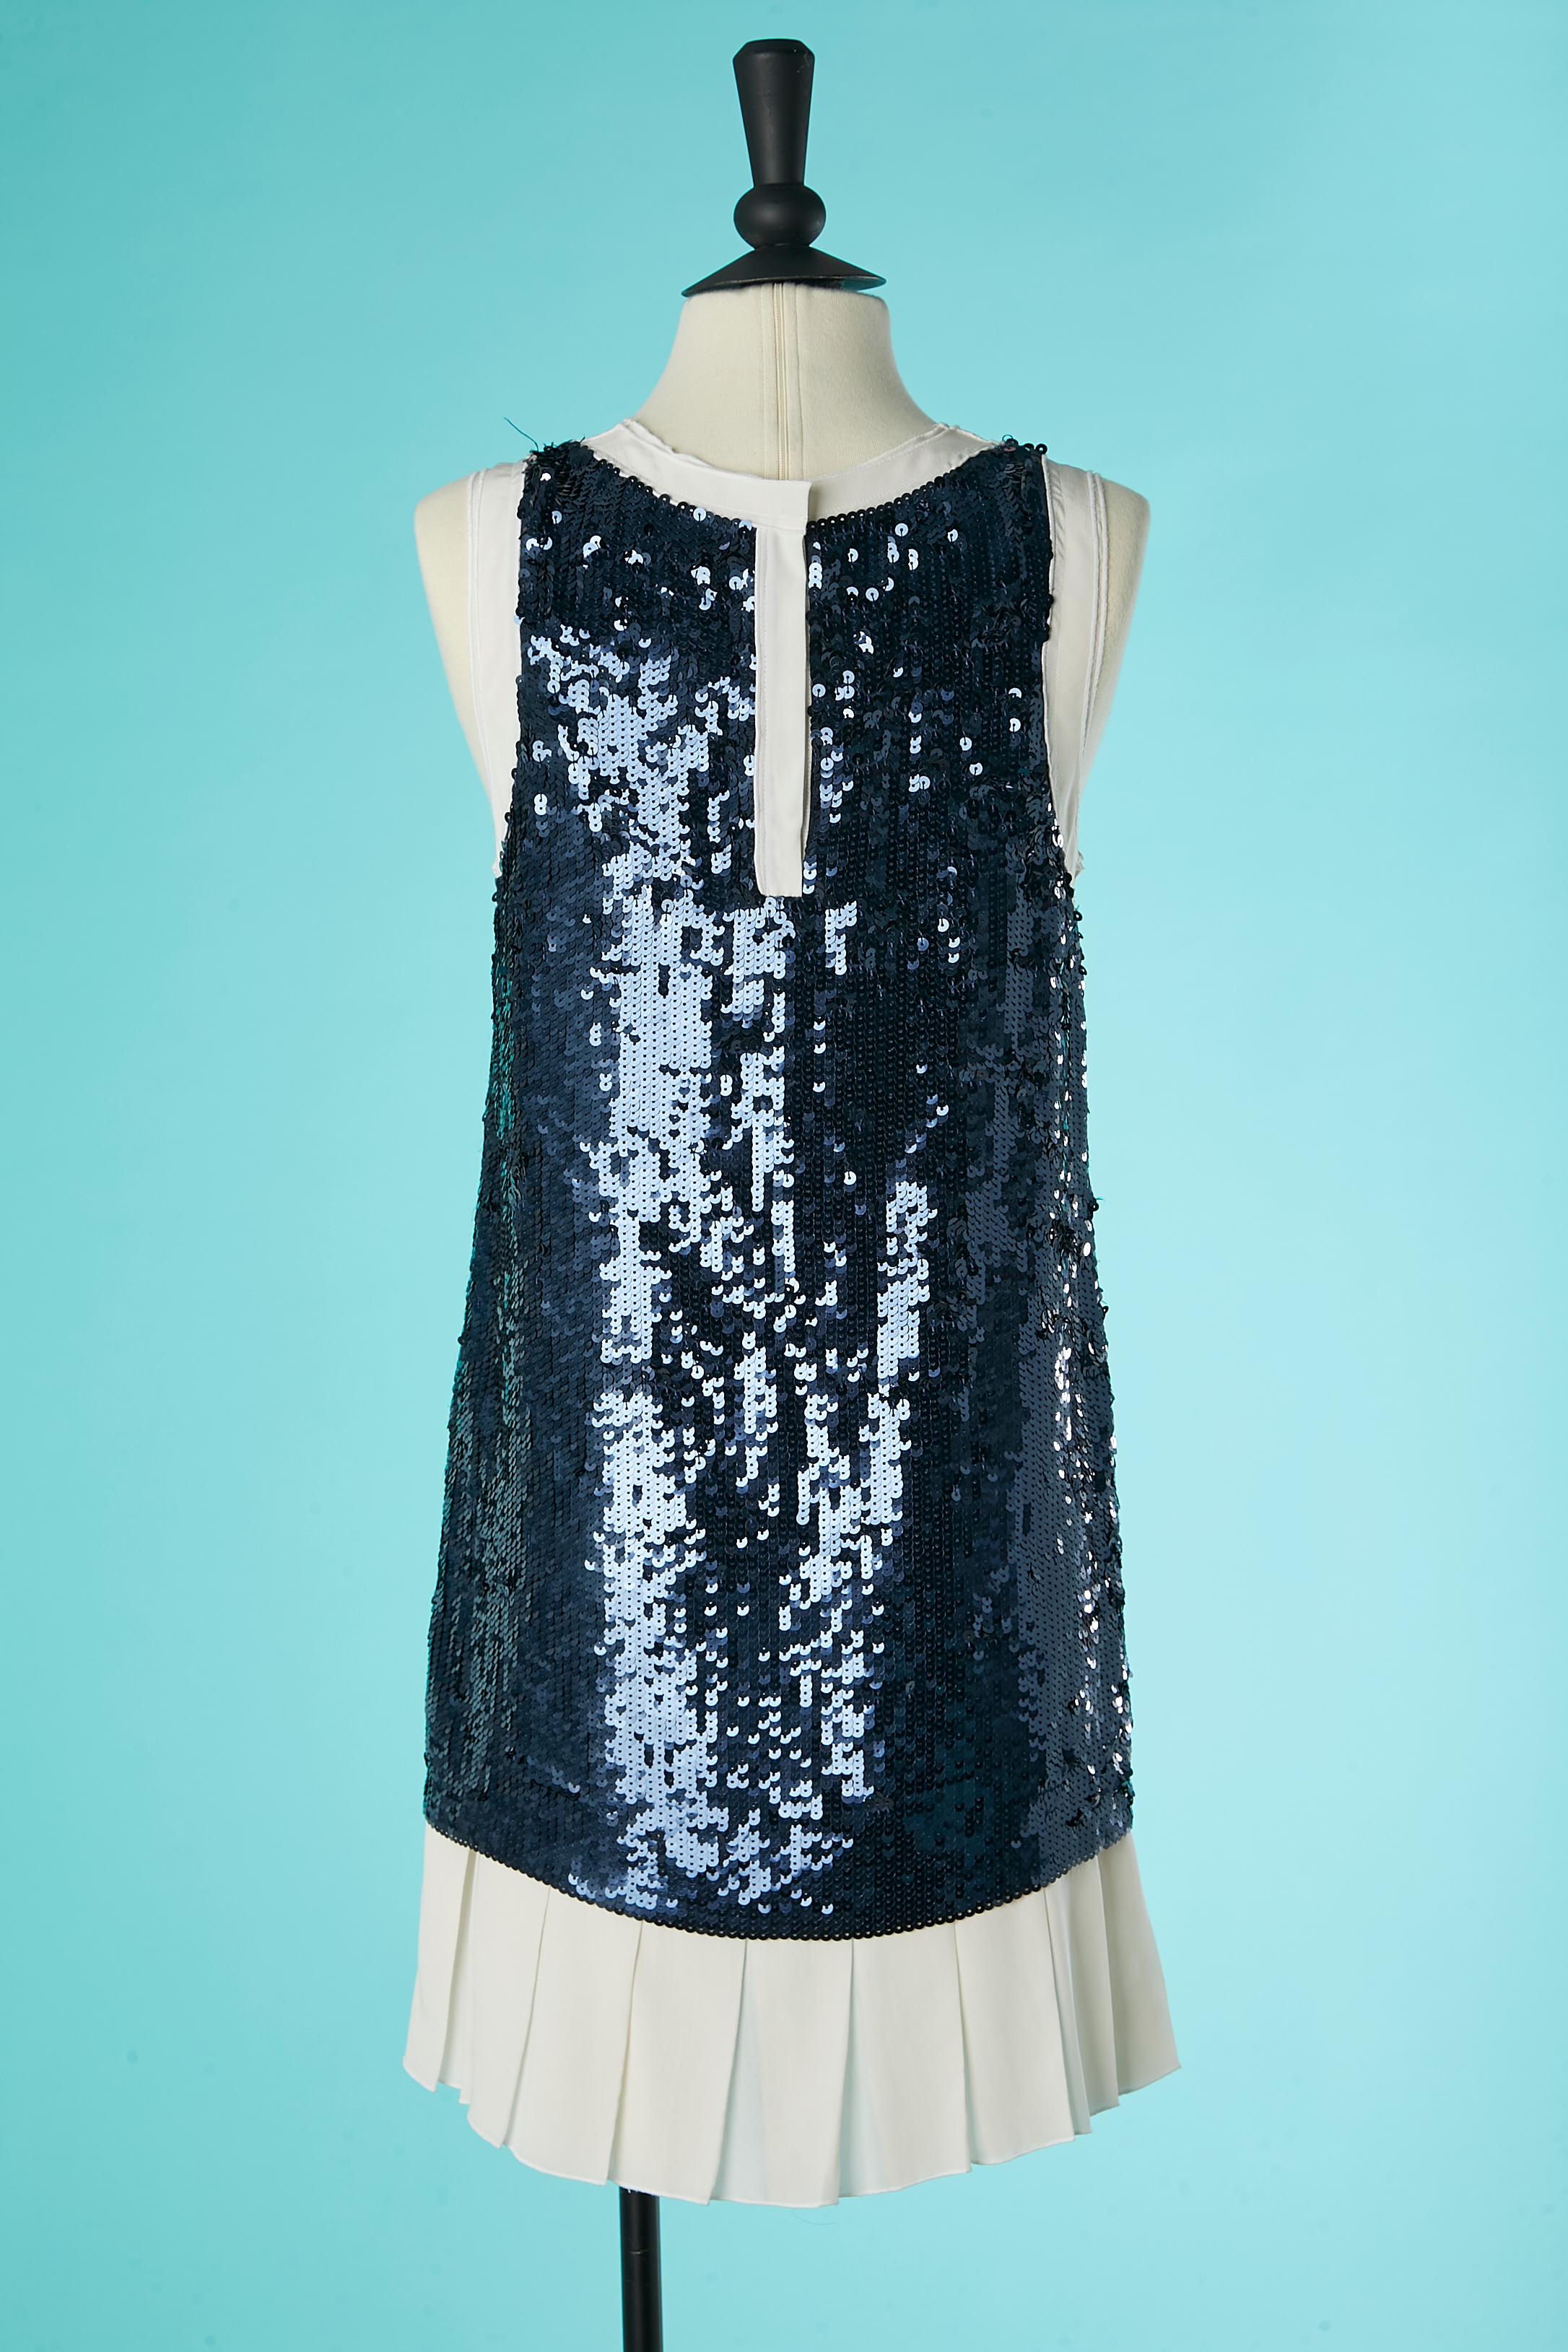 Mini dress in blue sequin with Anchor pattern and pleated bottom edge D&G  For Sale 2